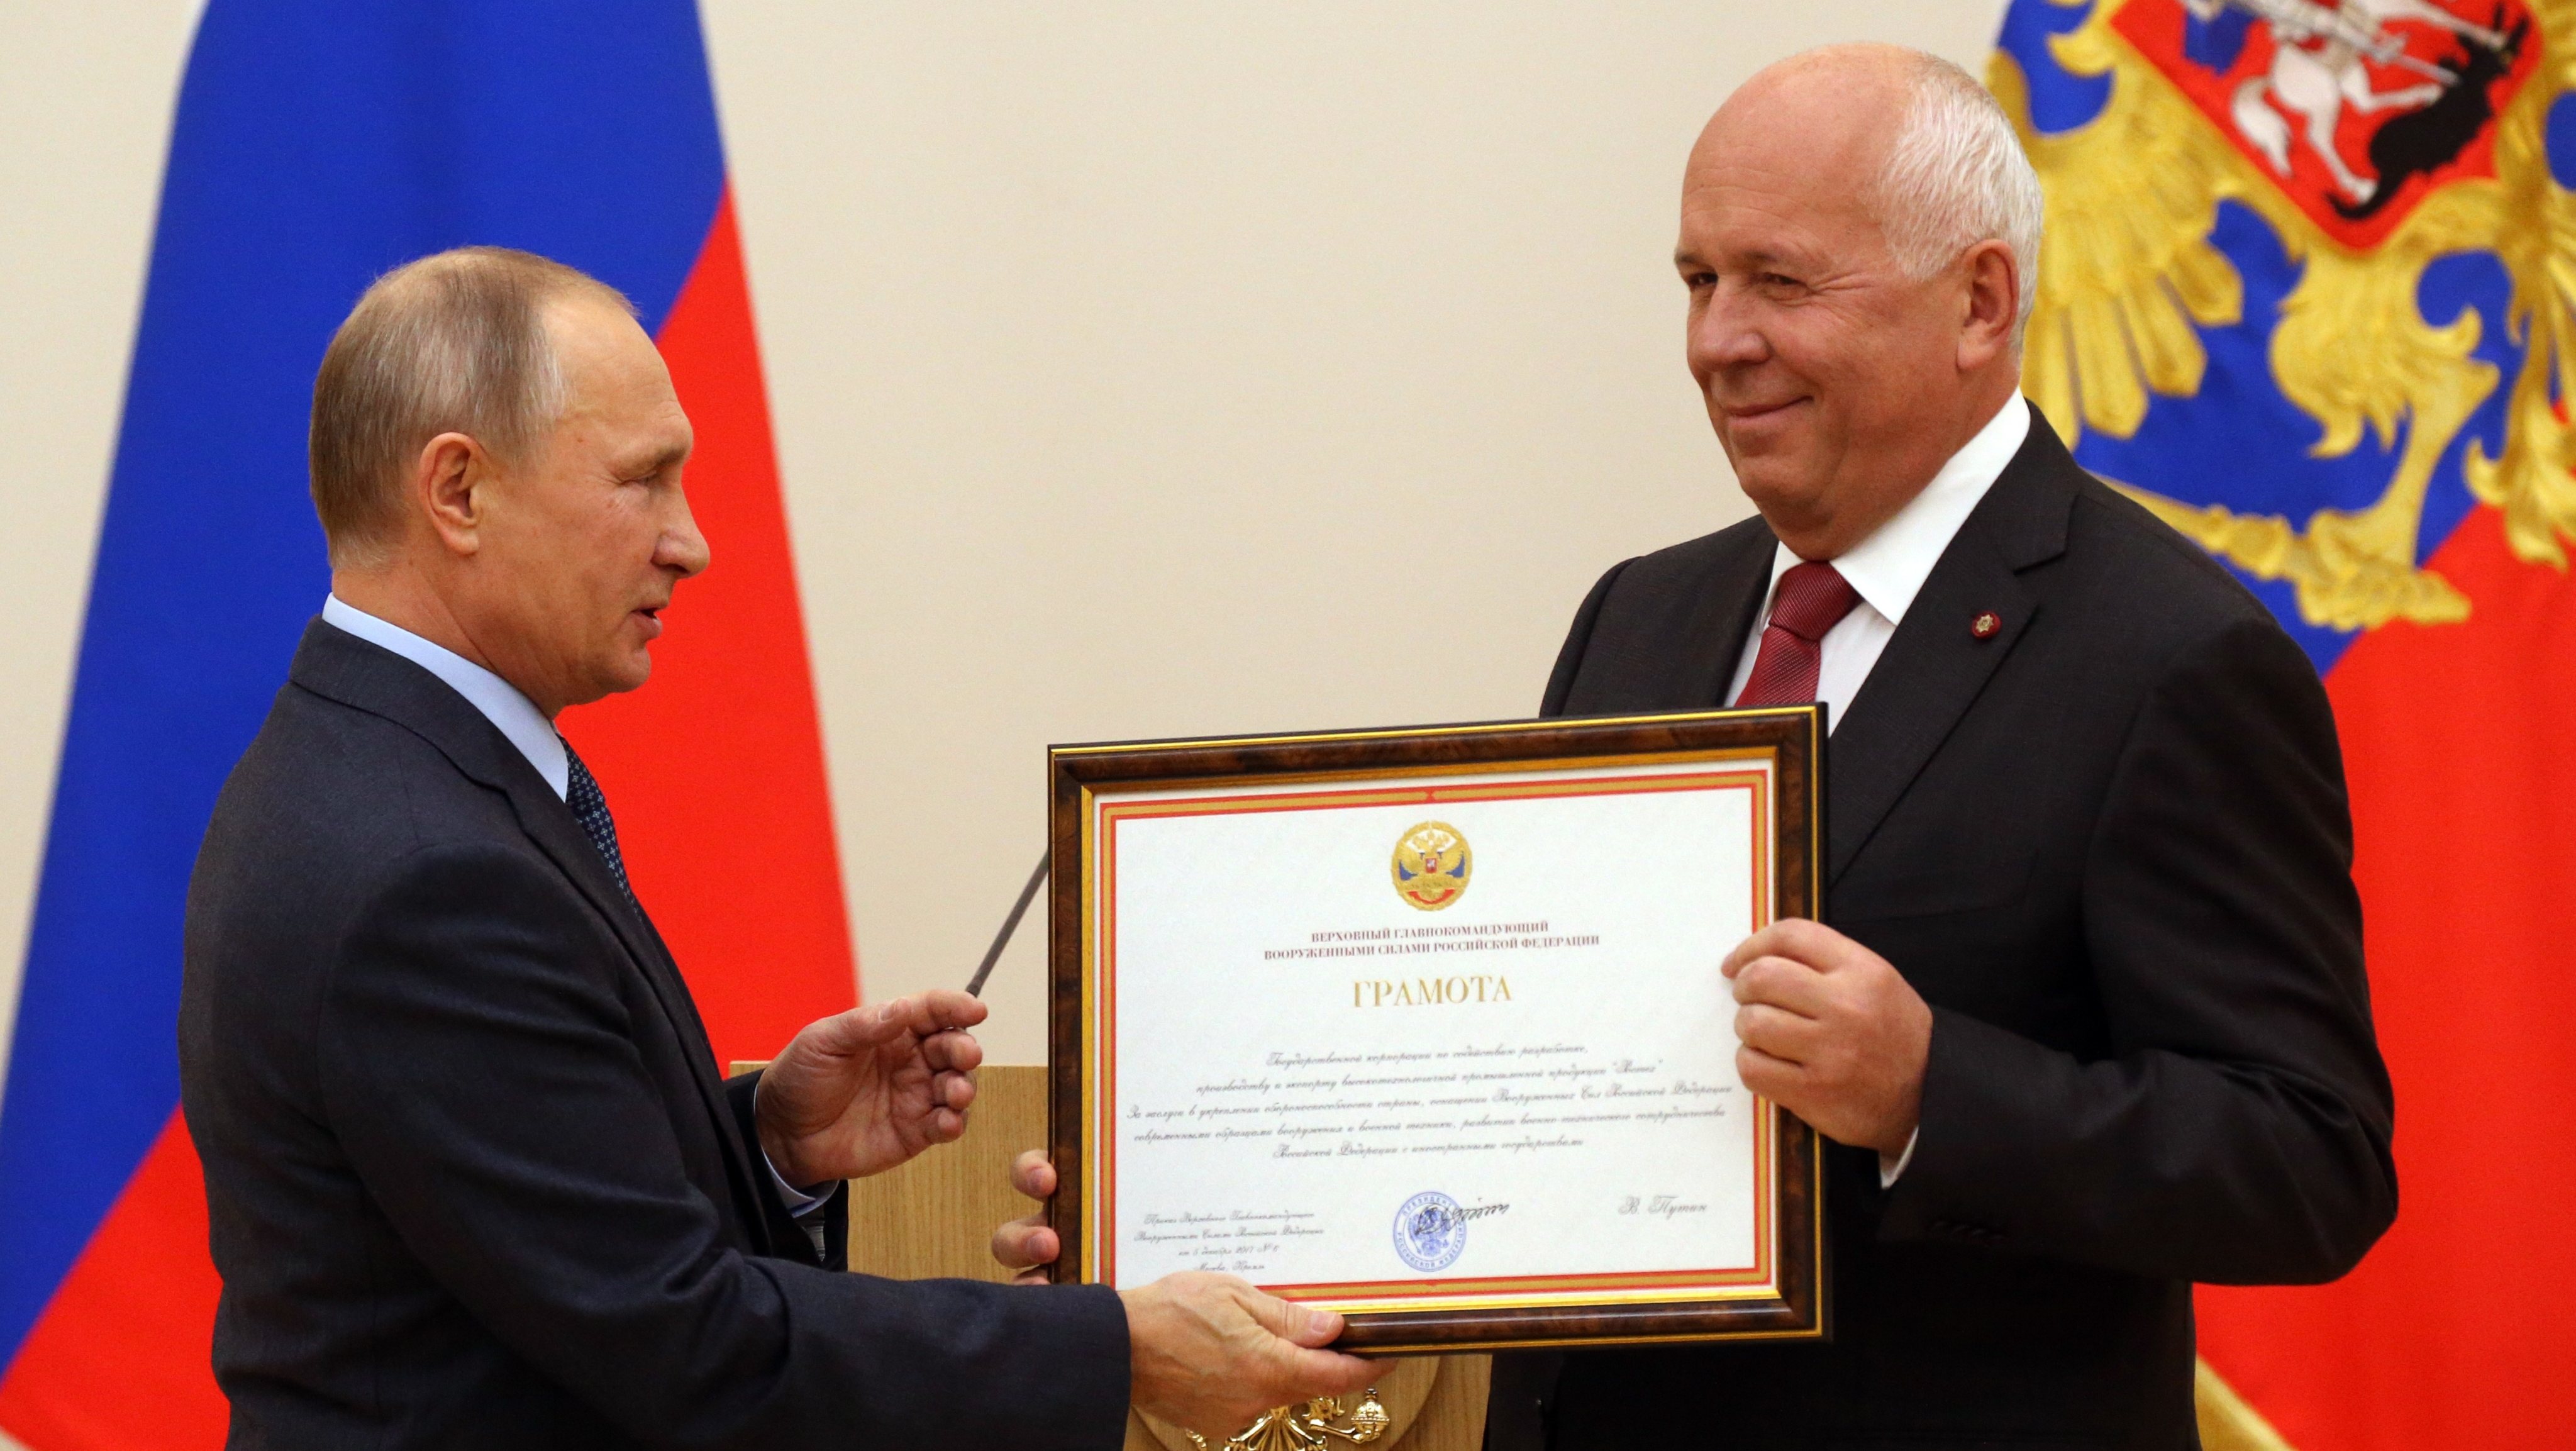 Russian President Vladimir Putin marks the 10-th anniversary of Rostec State copropation